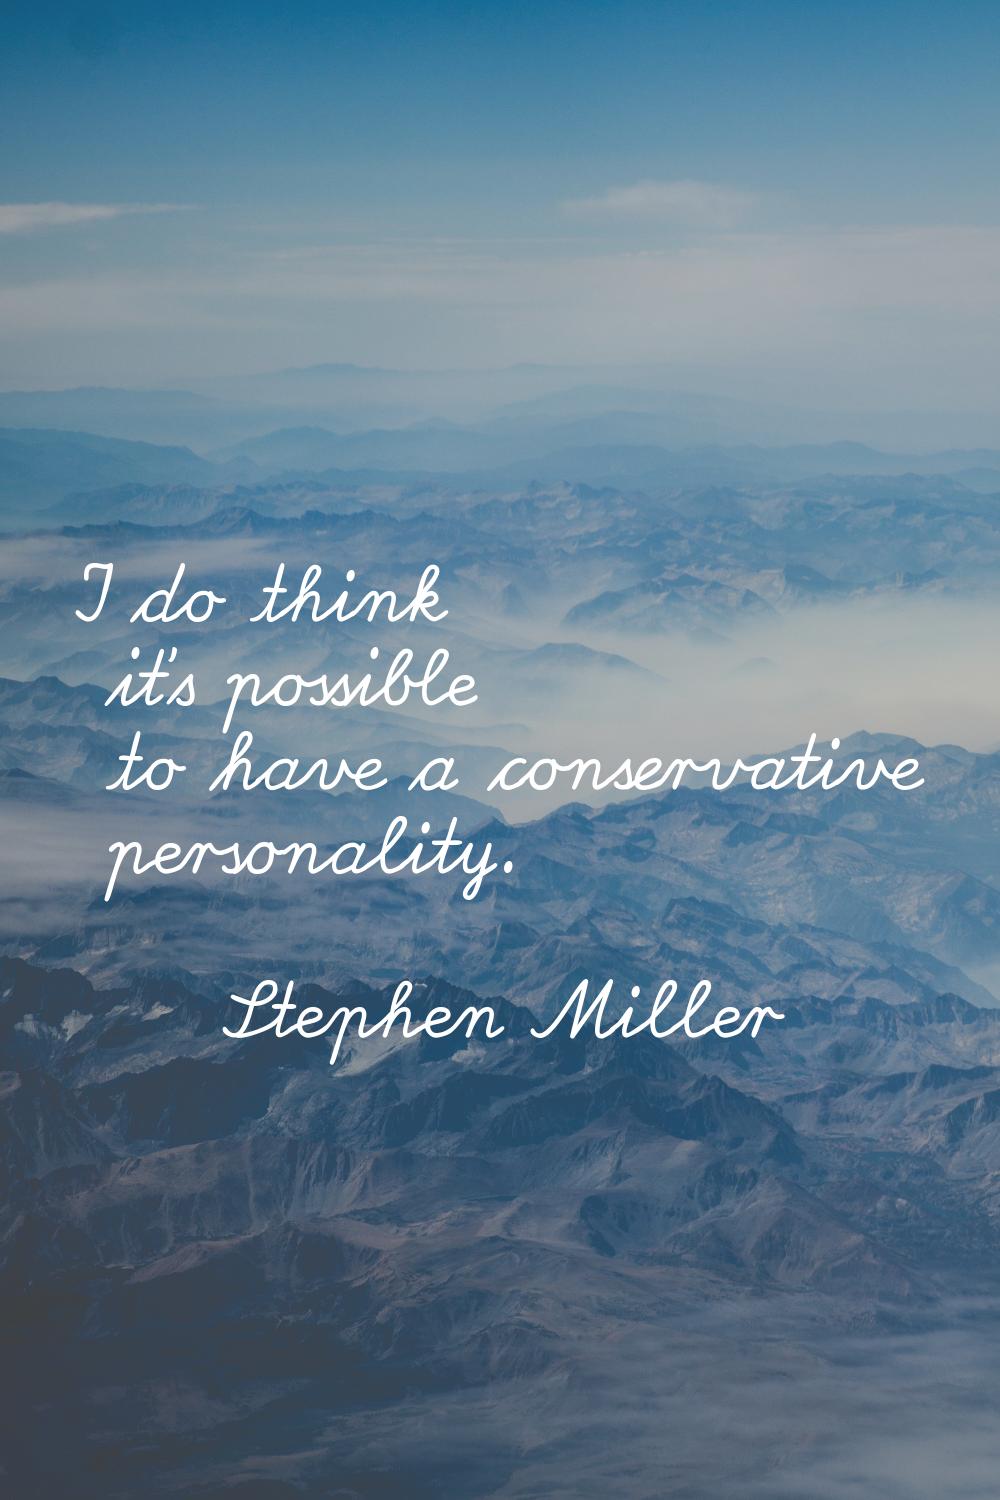 I do think it's possible to have a conservative personality.